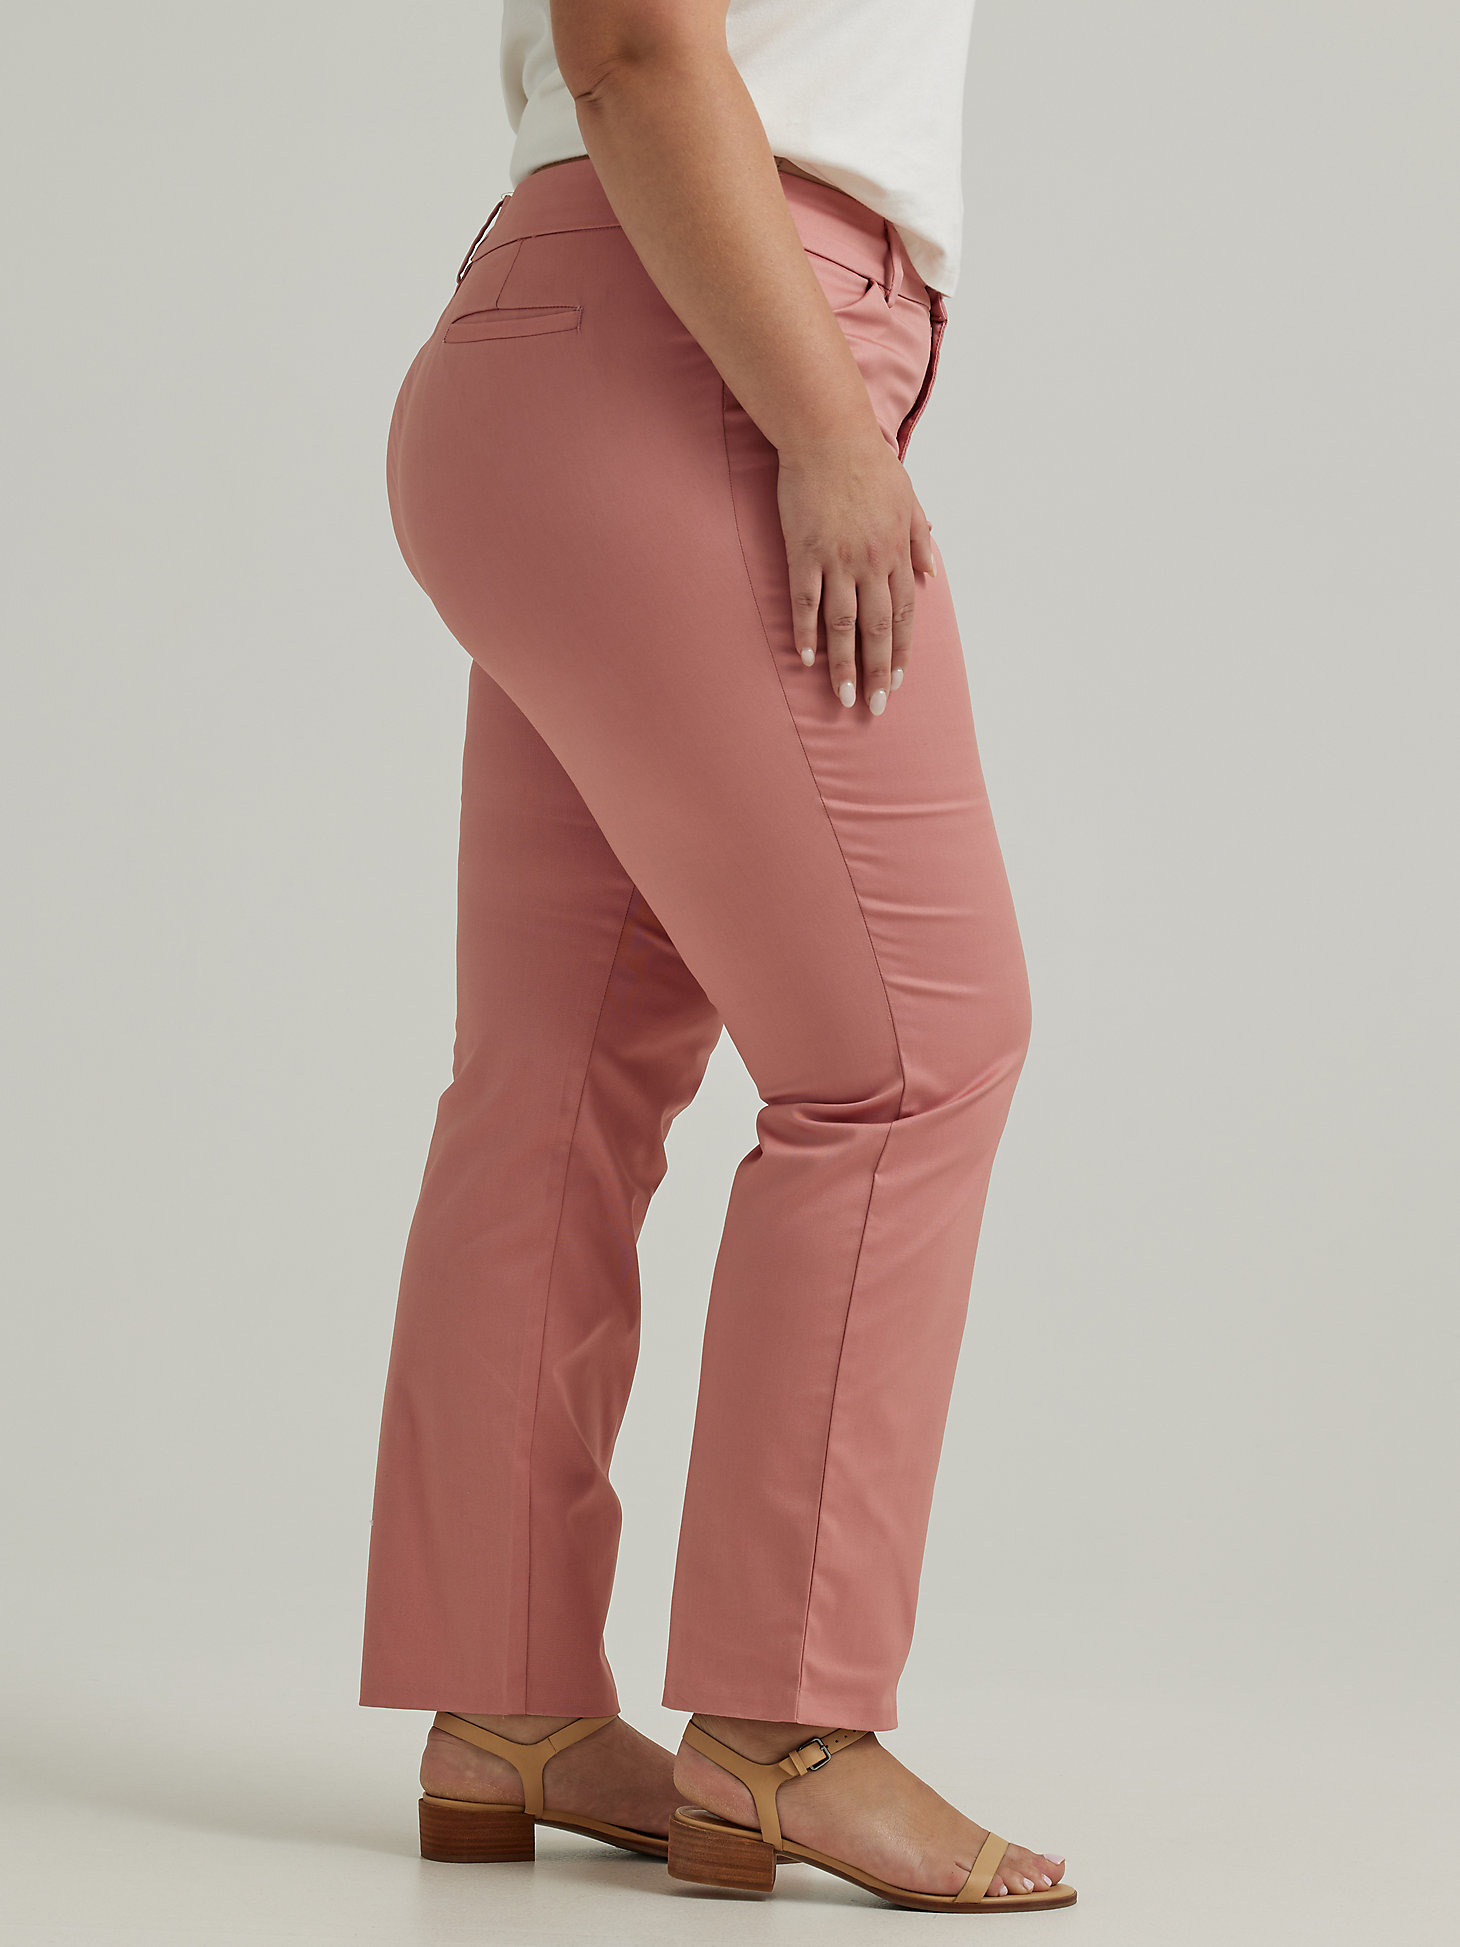 Women's Wrinkle Free Relaxed Fit Straight Leg Pant (Plus) in Mallory Pink alternative view 2